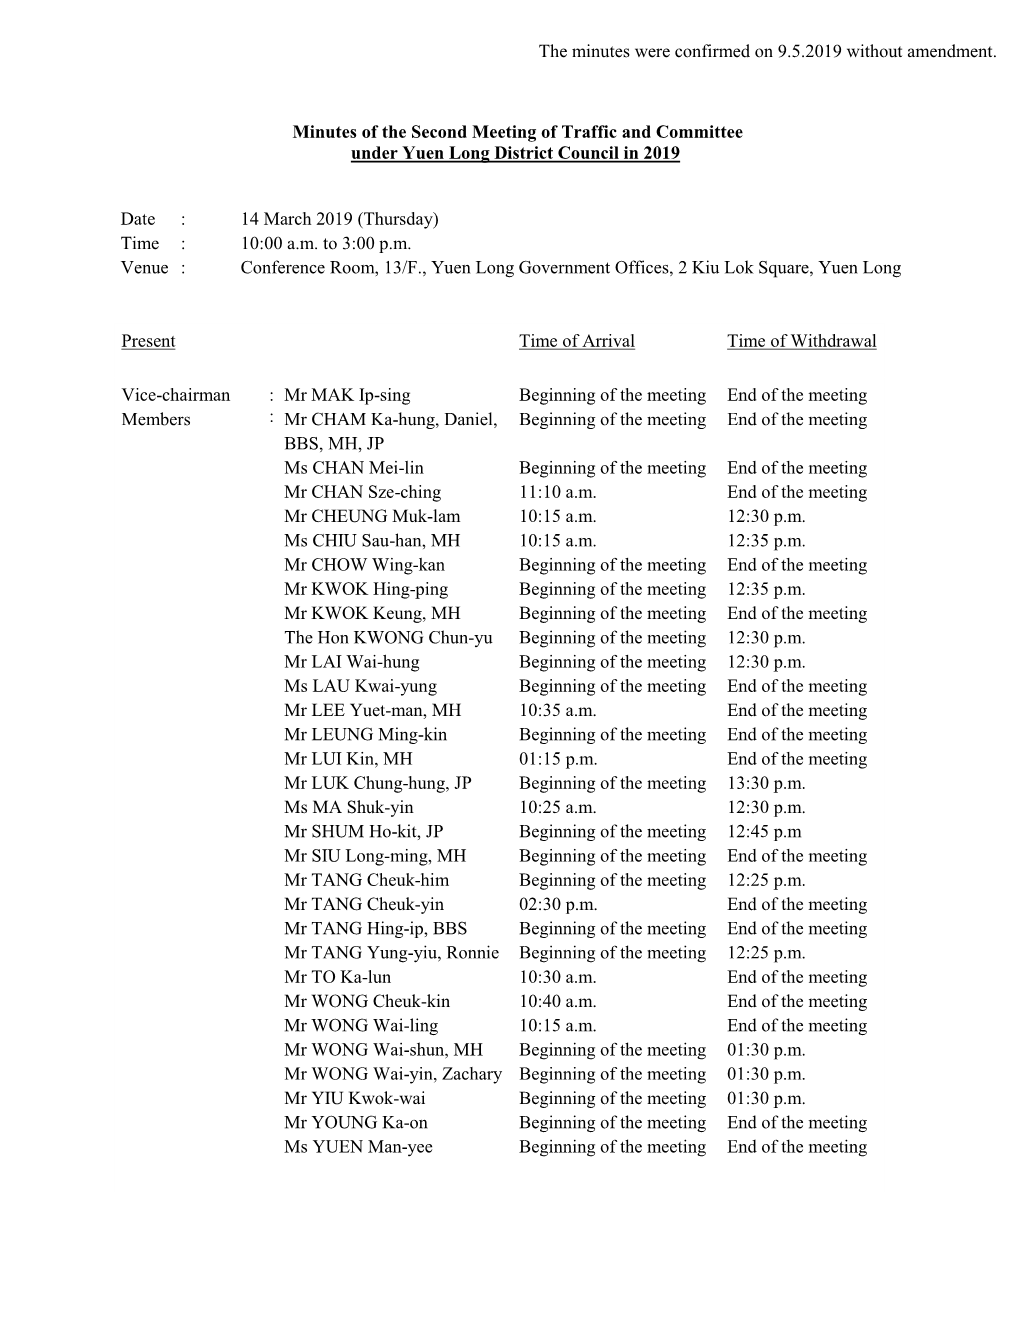 Minutes of the Second Meeting of Traffic and Committee Under Yuen Long District Council in 2019